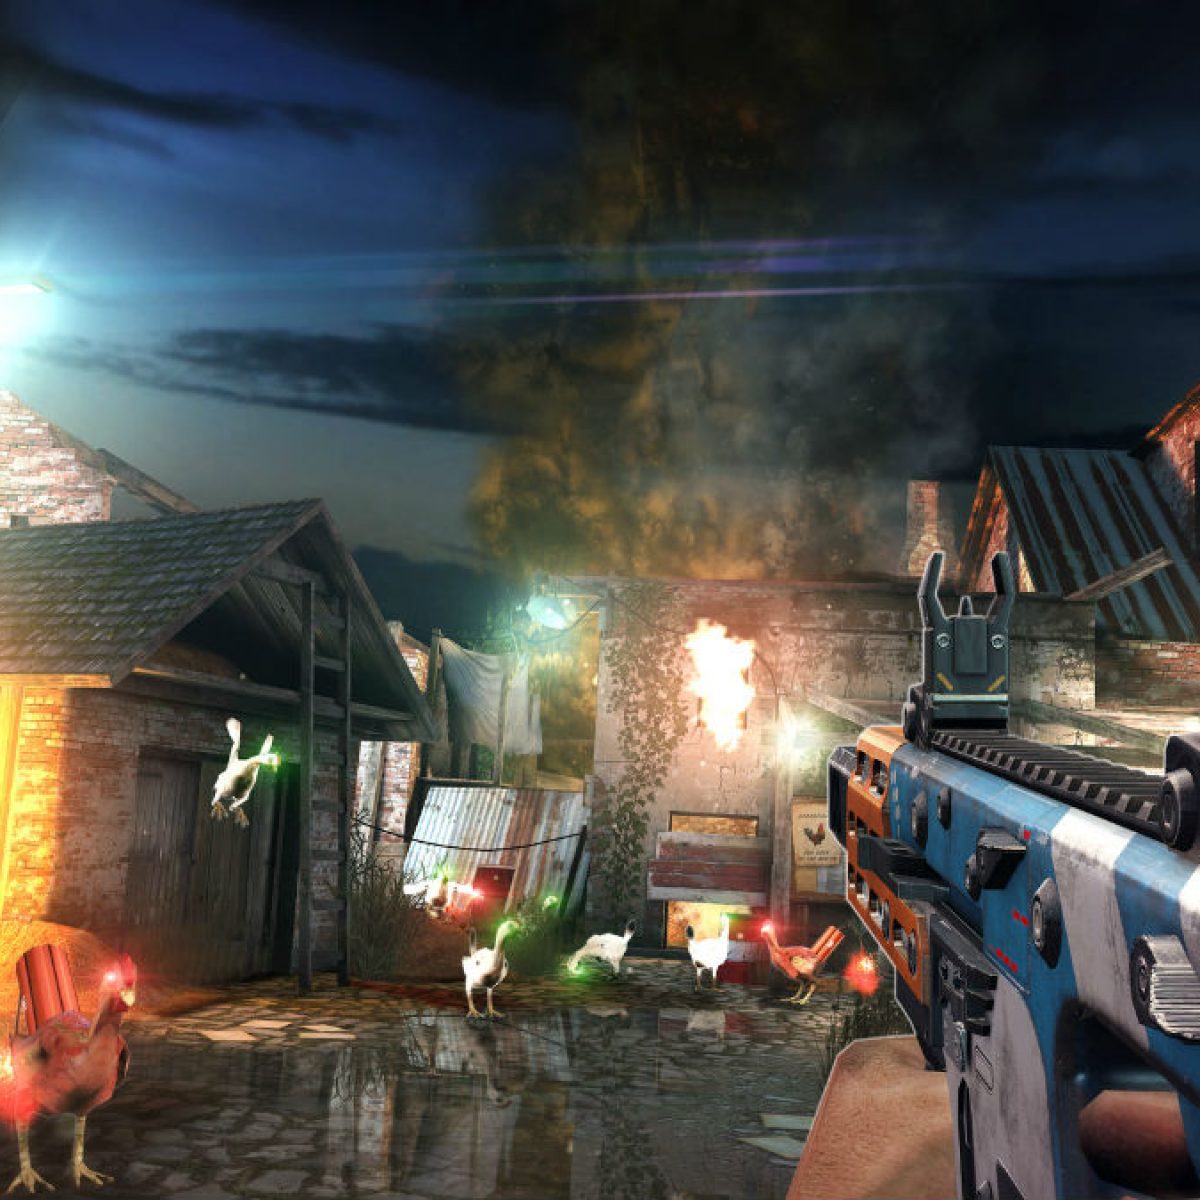 Dead Trigger 2 Celebrates 100 Million Downloads With New Game Modes and Zombie Chickens